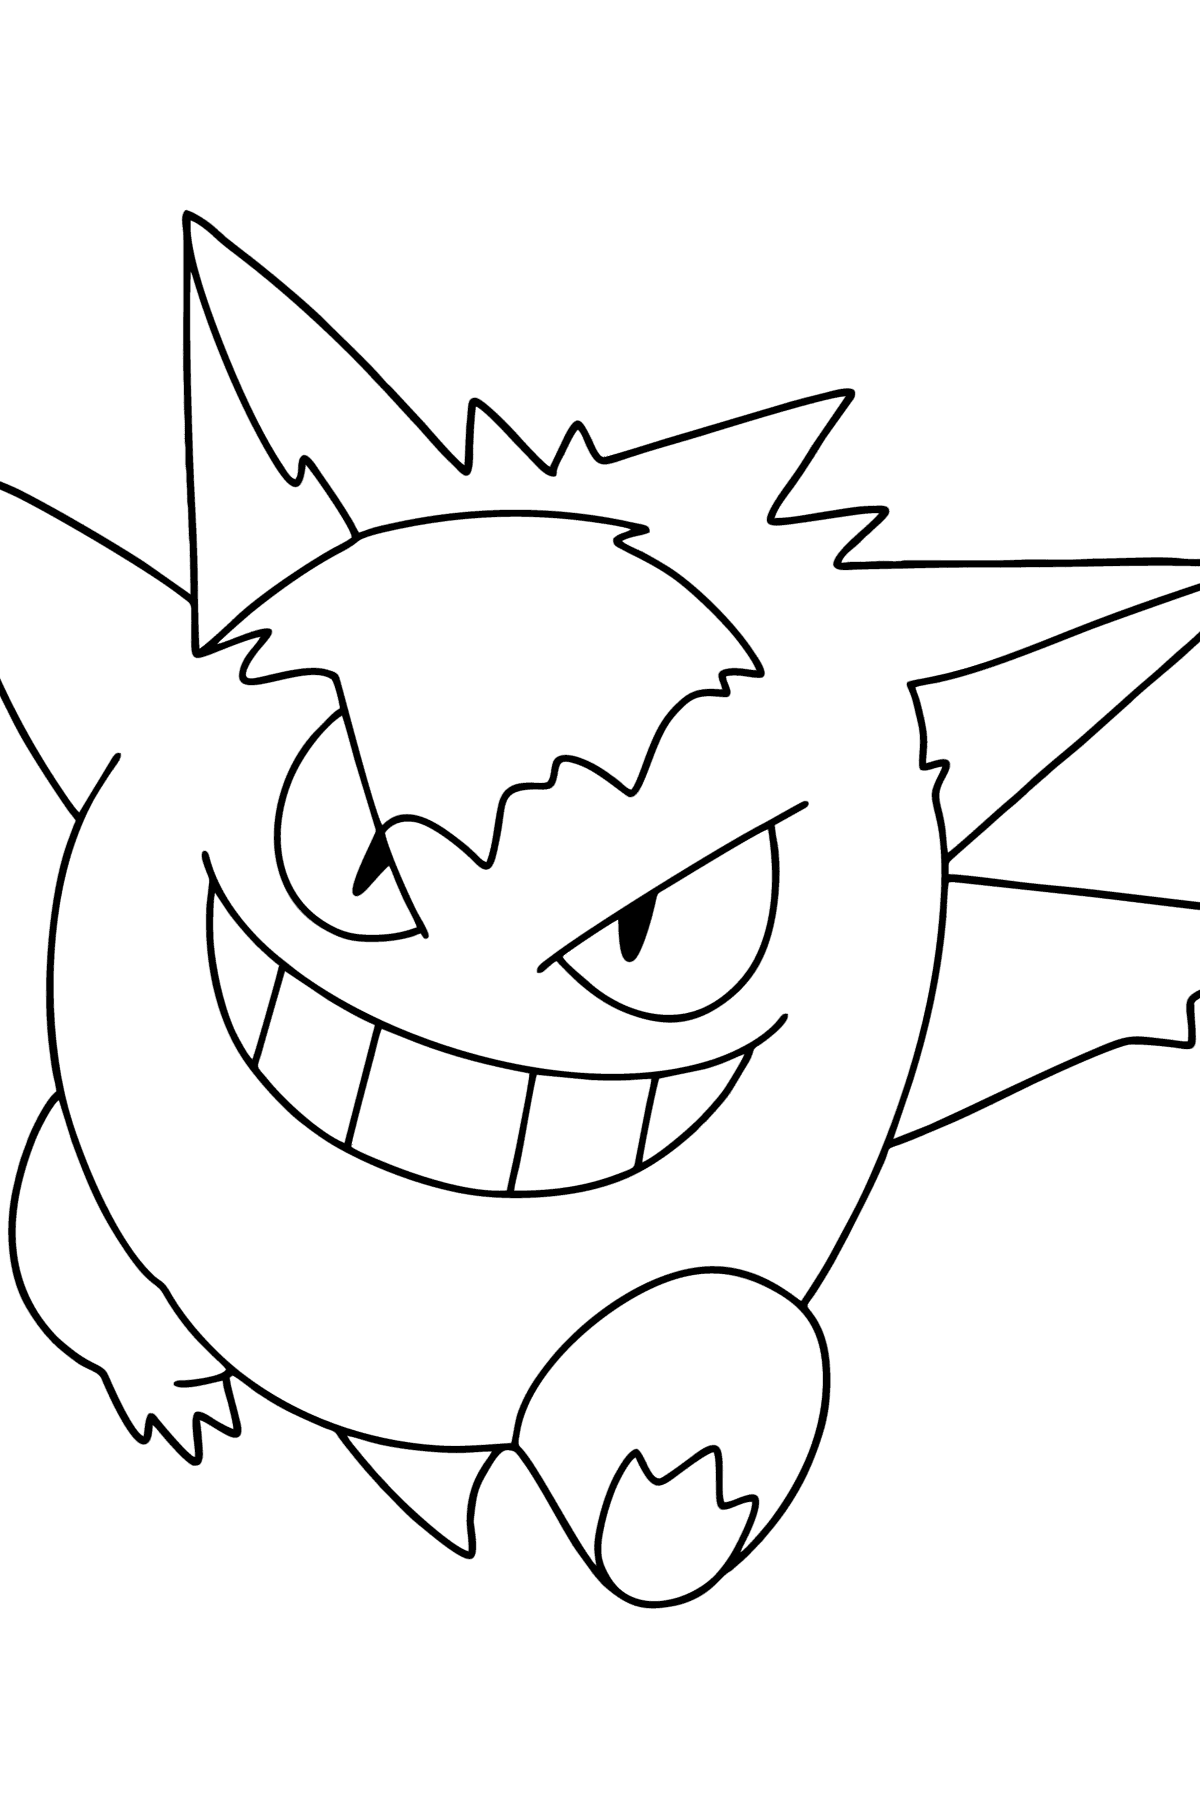 Pokémon Go Gengar coloring page - Coloring Pages for Kids